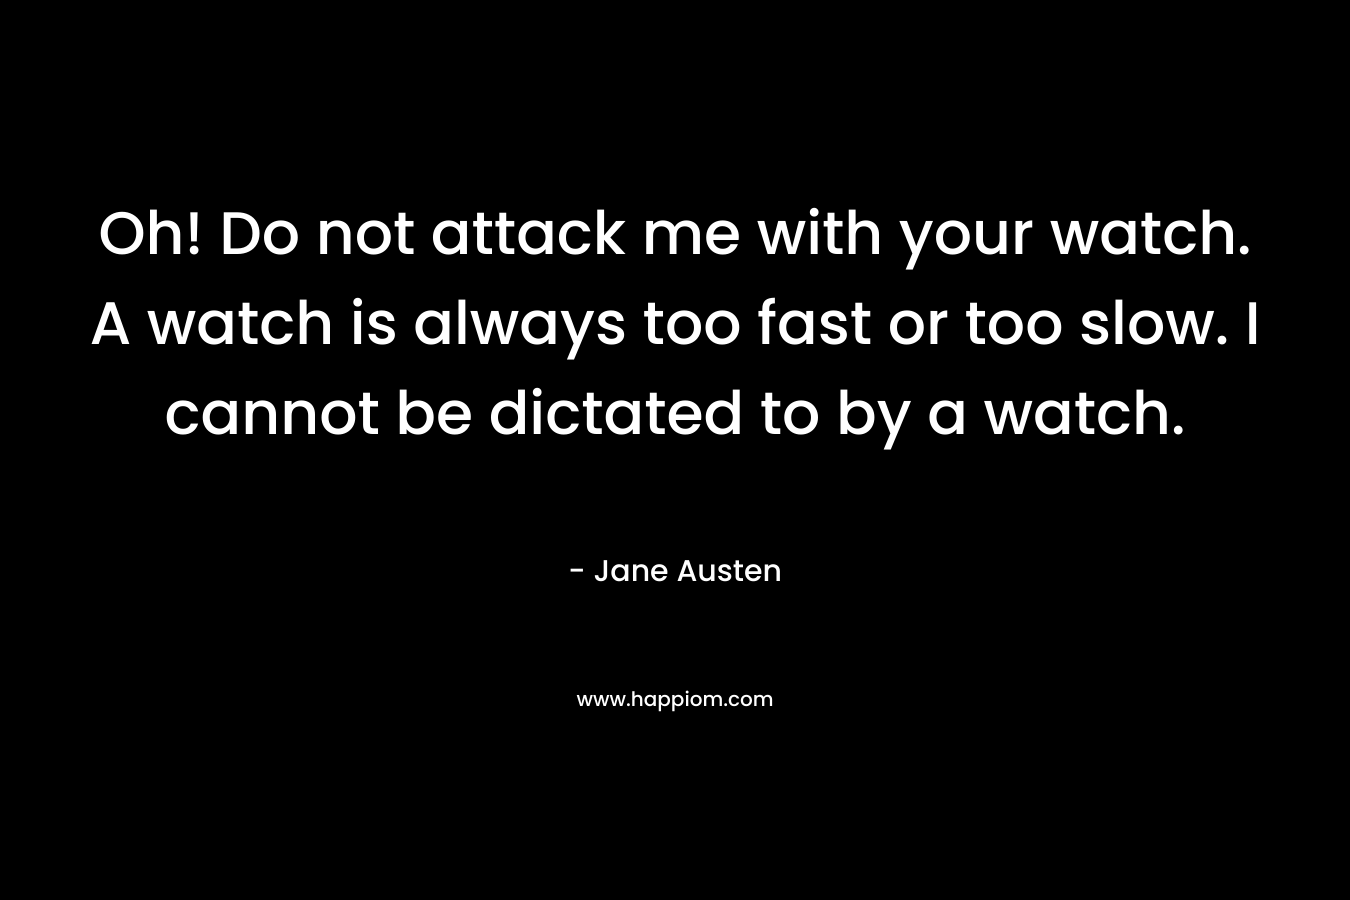 Oh! Do not attack me with your watch. A watch is always too fast or too slow. I cannot be dictated to by a watch. – Jane Austen